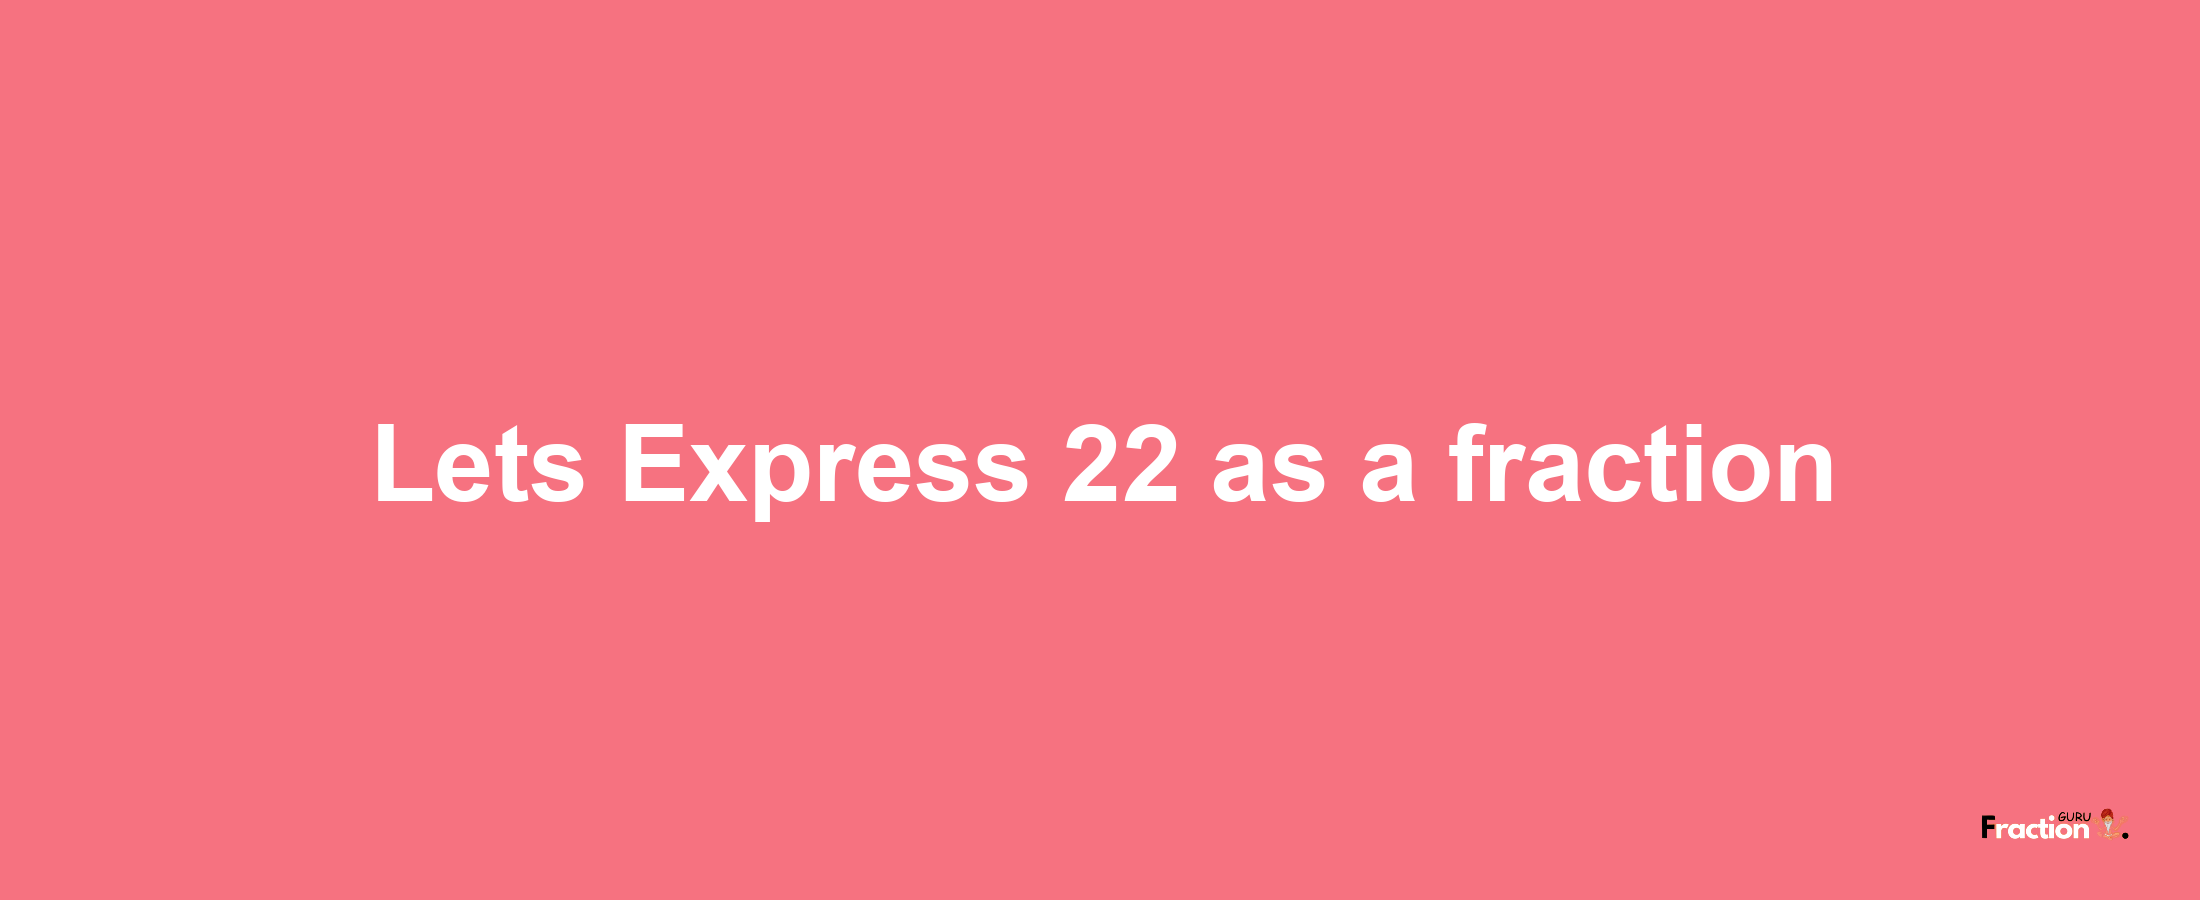 Lets Express 22 as afraction